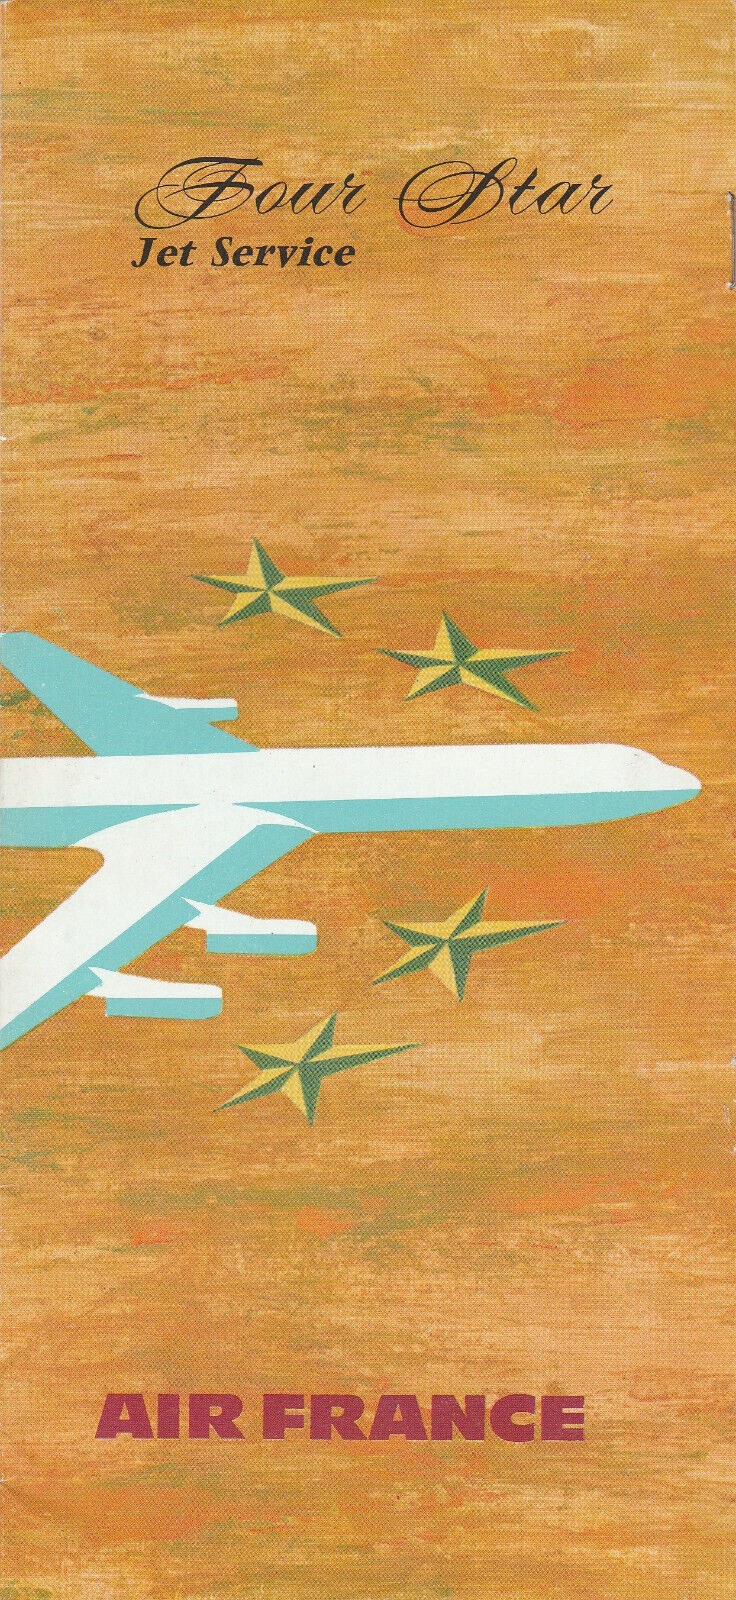 Air France 1960 Boeing 707 promotion brochure